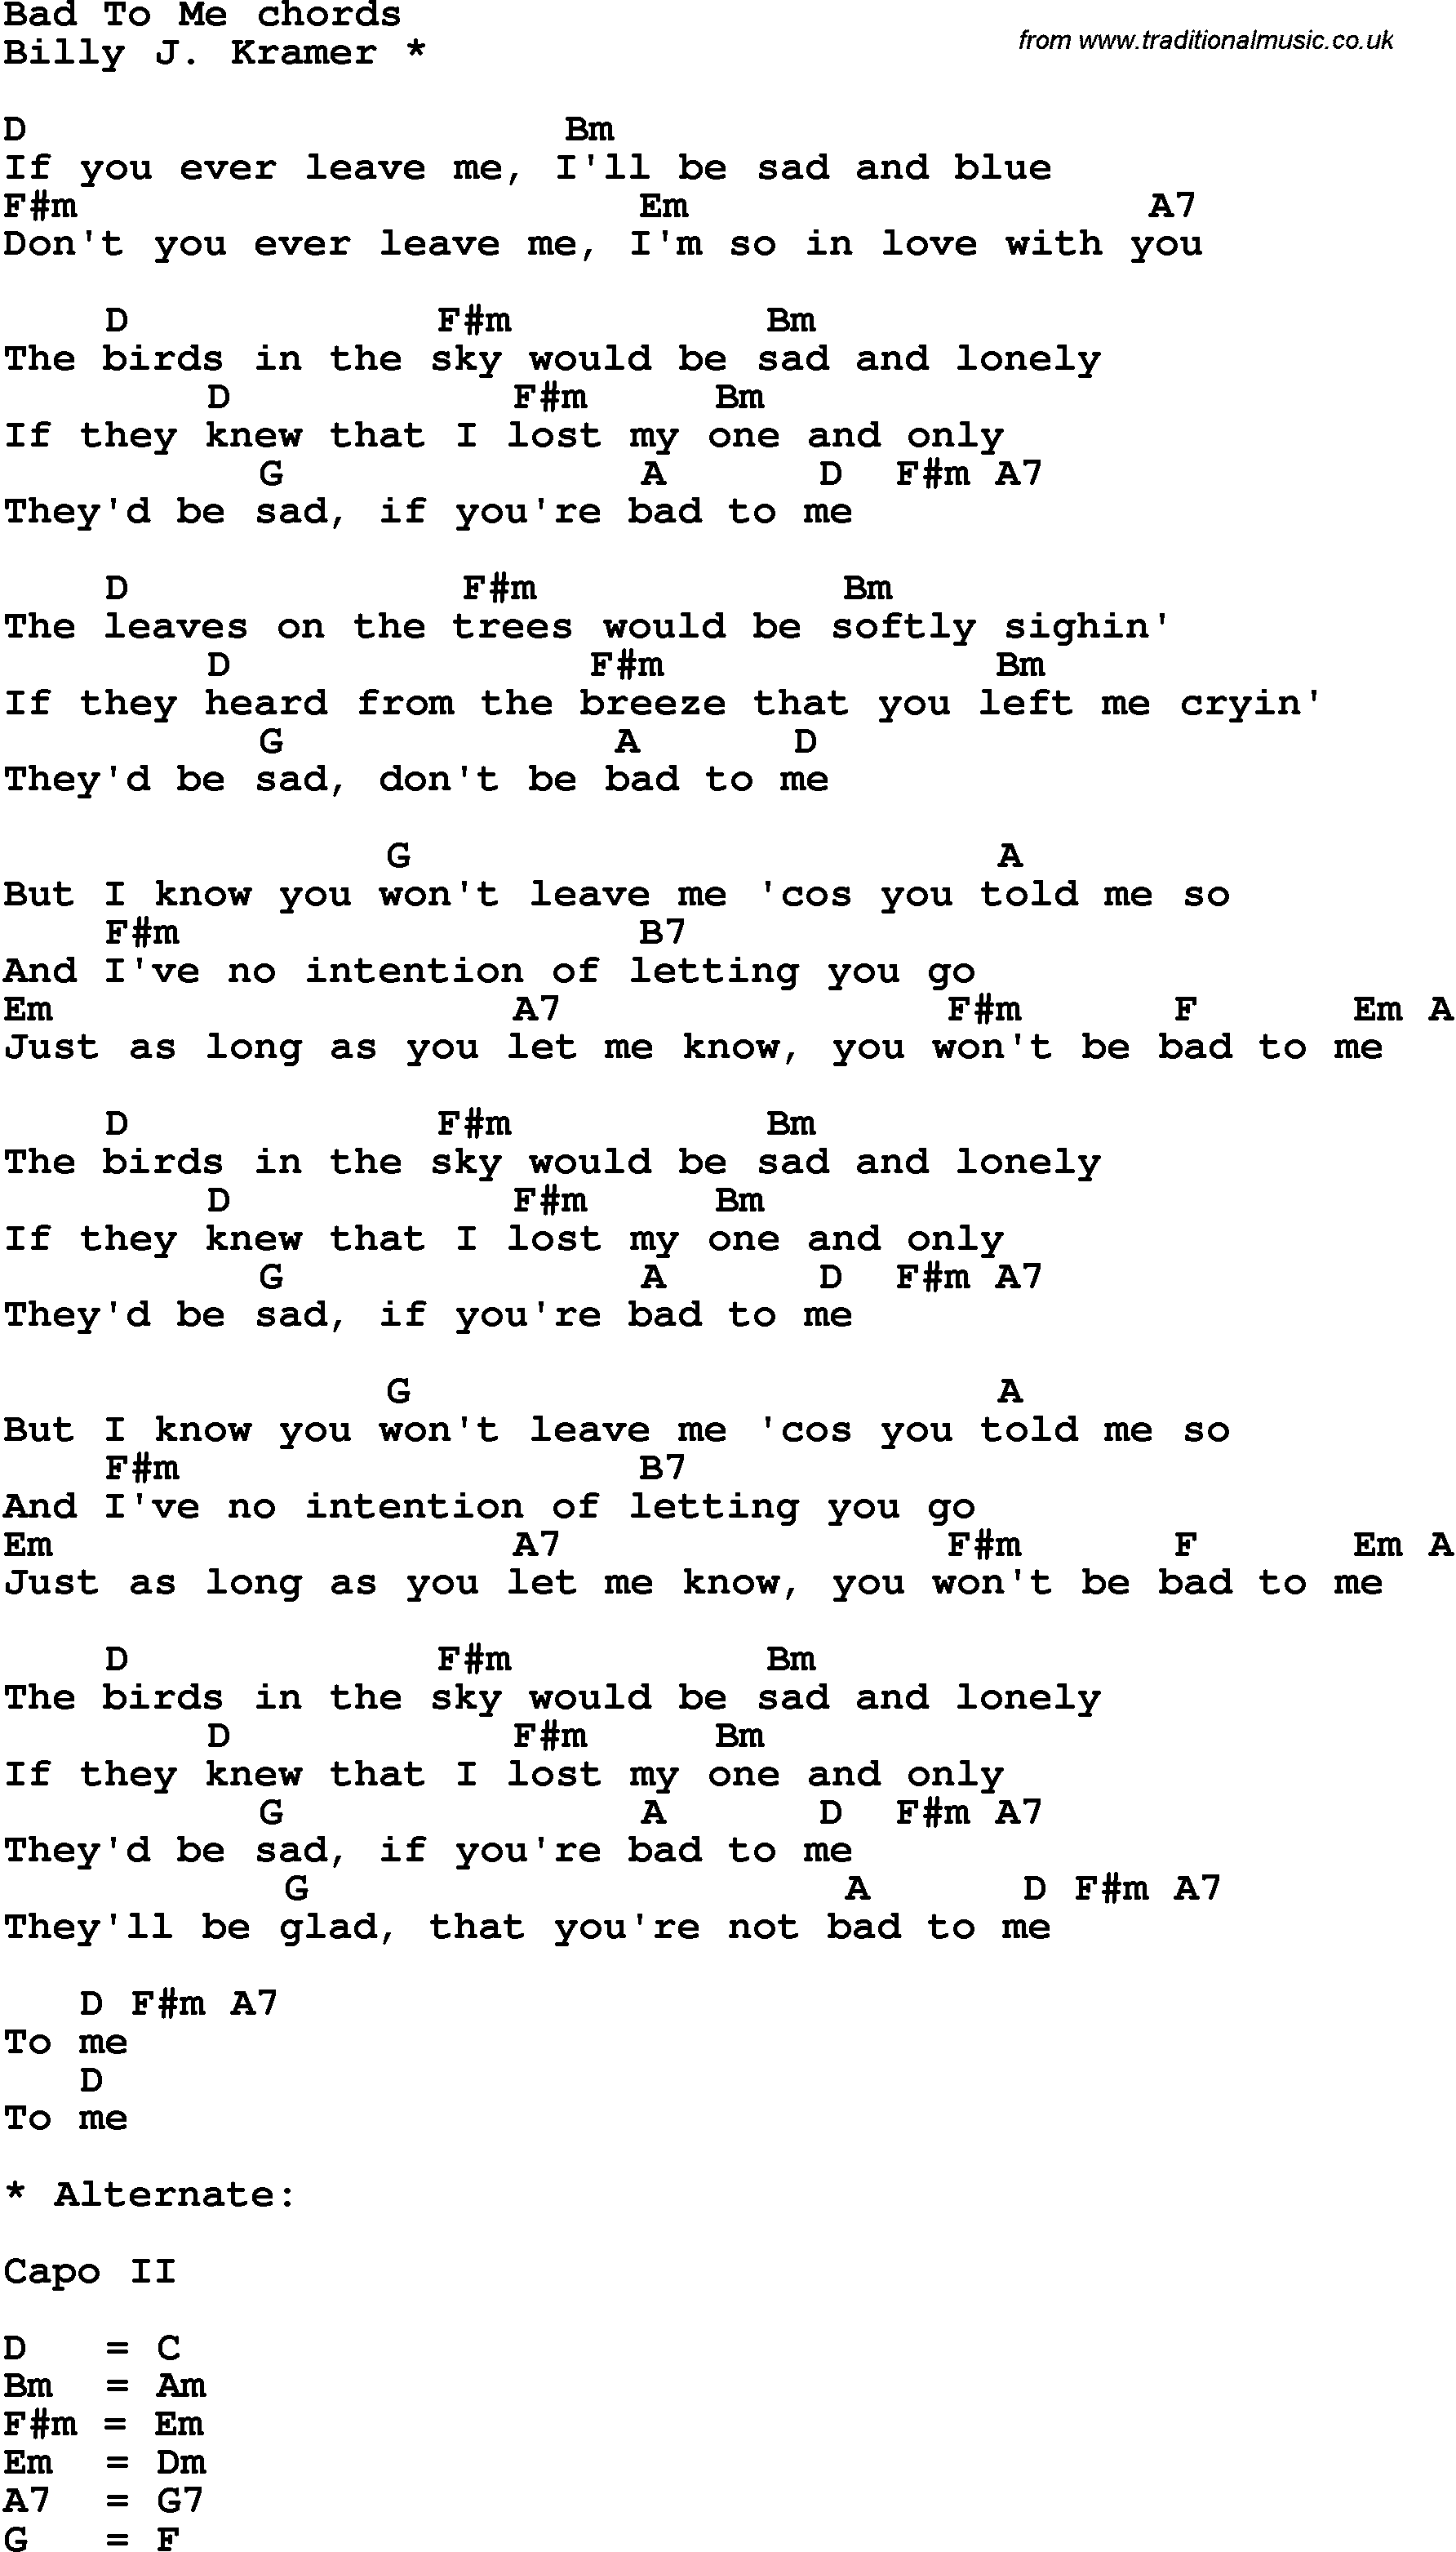 Song Lyrics with guitar chords for Bad To Me